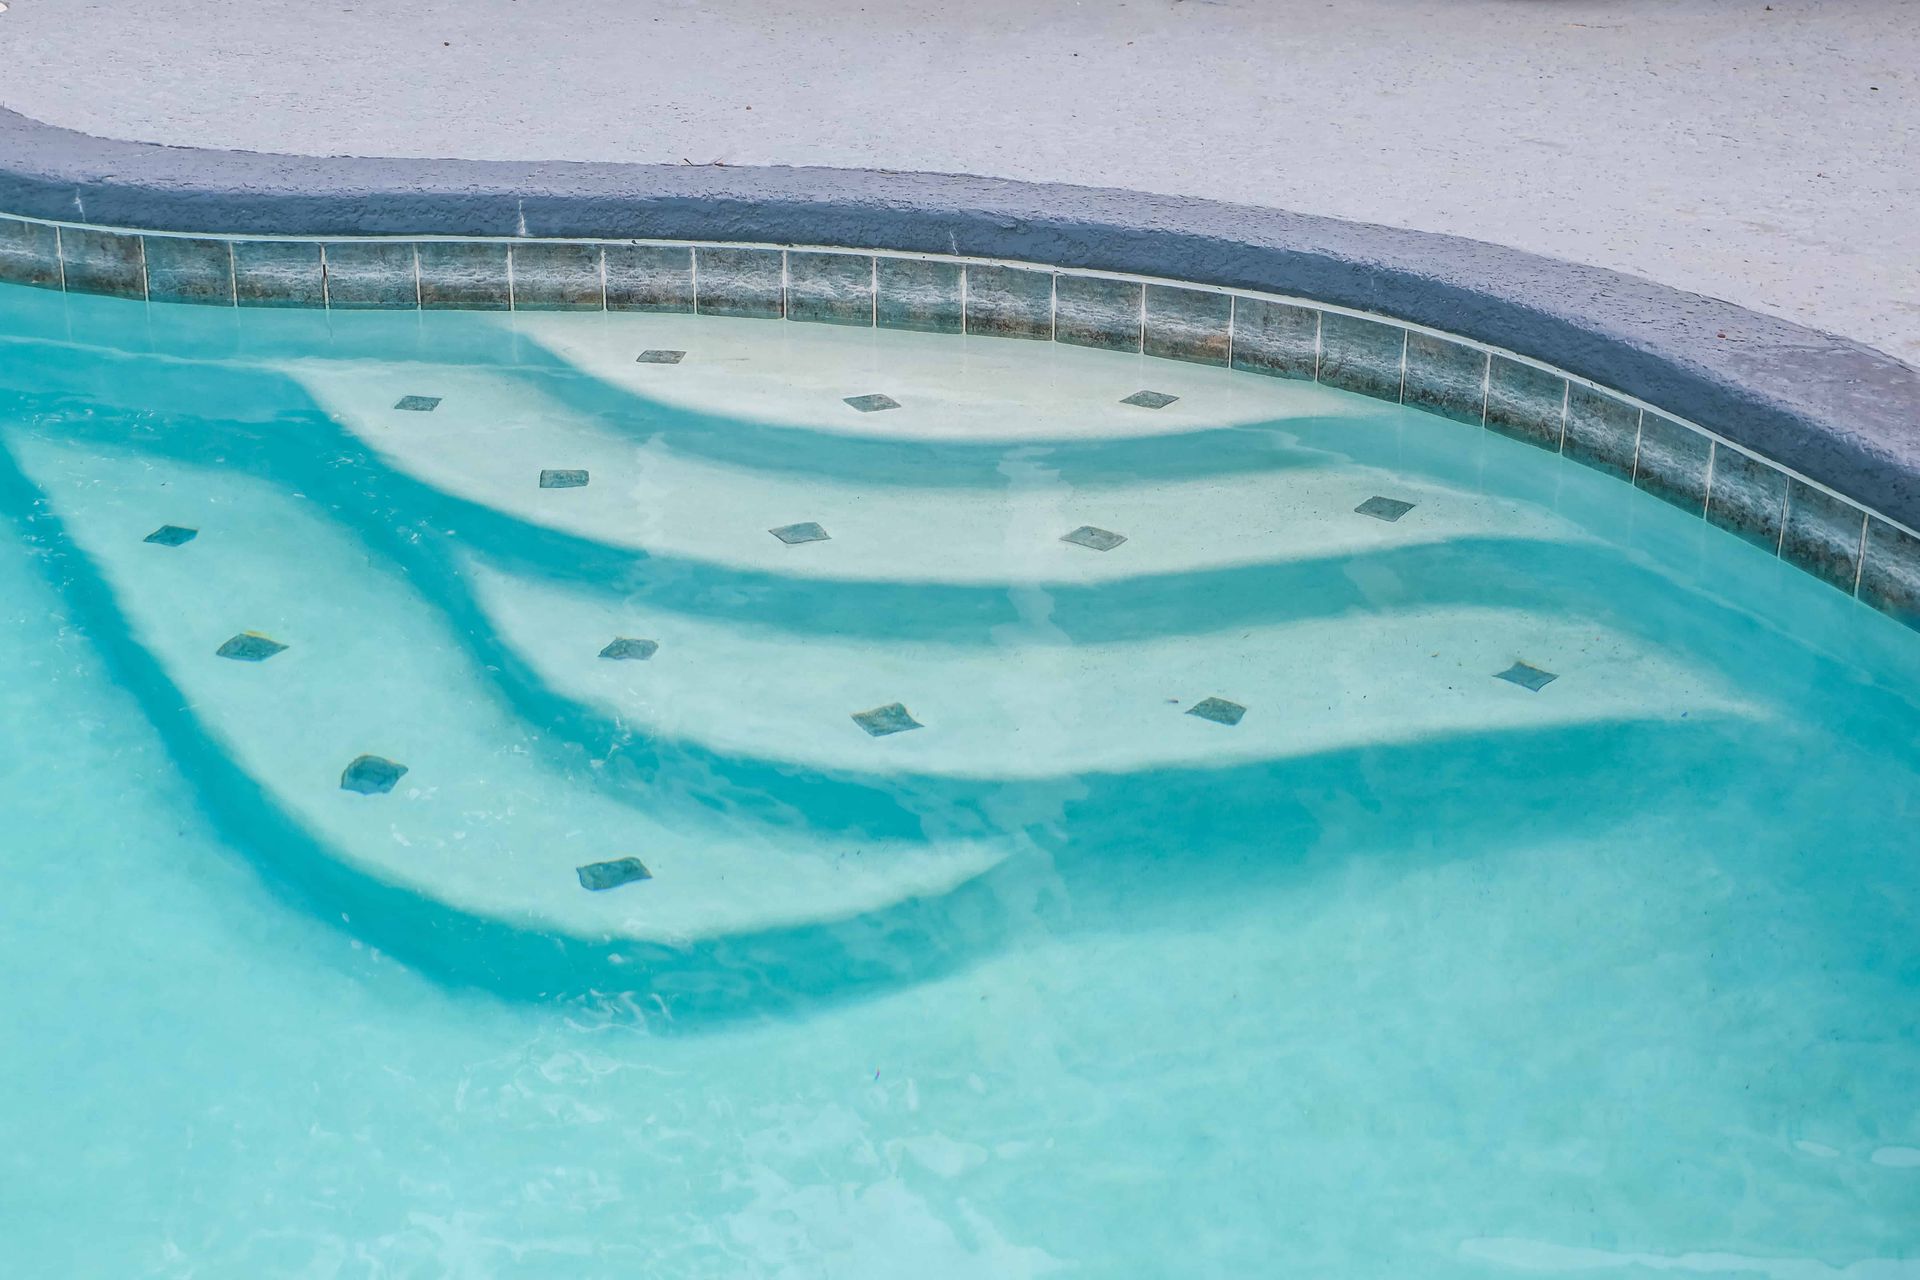 A swimming pool steps under water